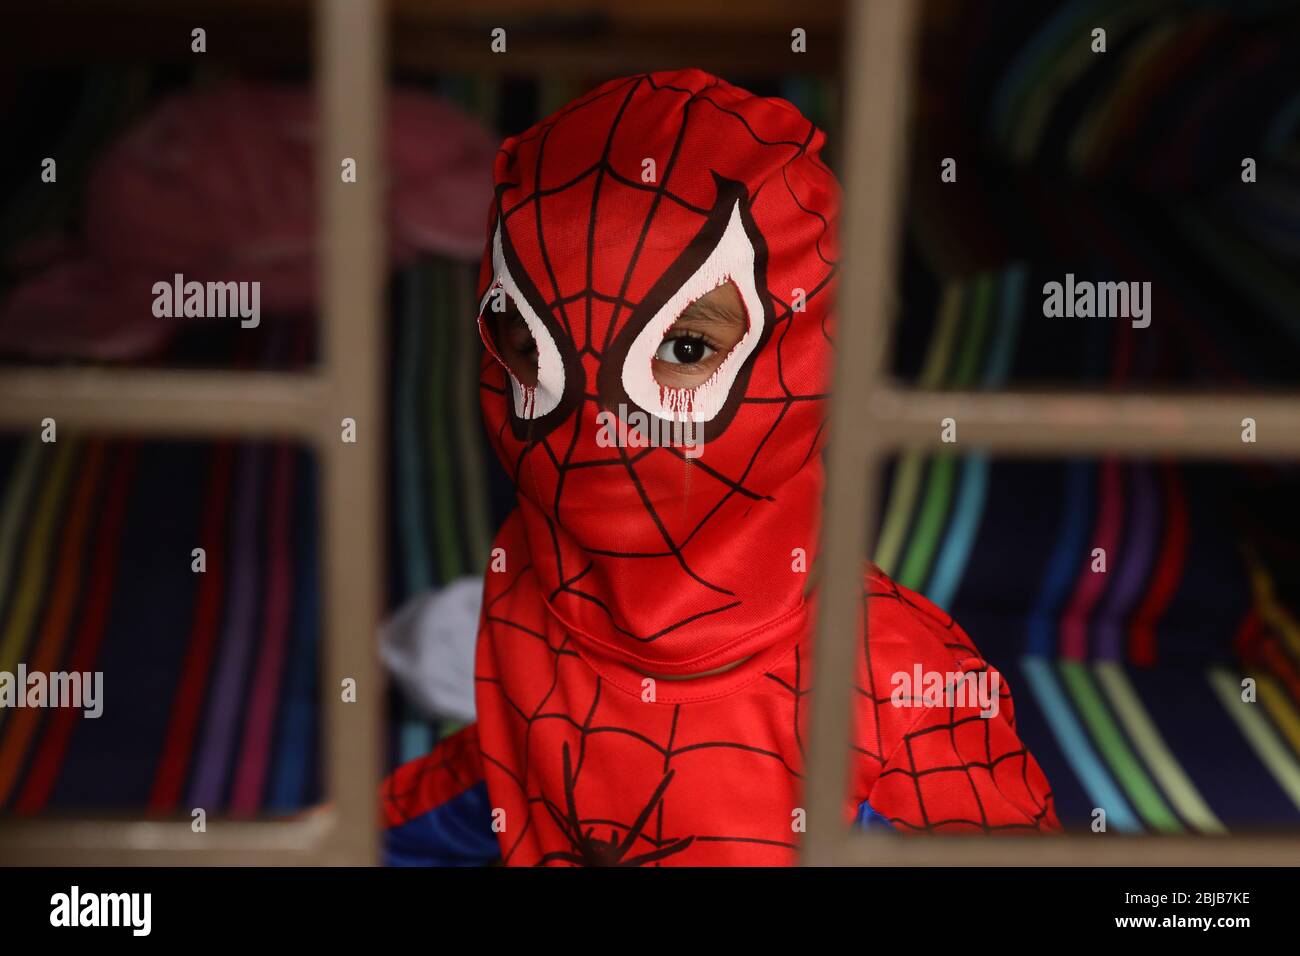 A child wearing a spider-man costume looks out of the window during the   71% of the children said they feel isolated and lonely due  to school closures and 91% of children